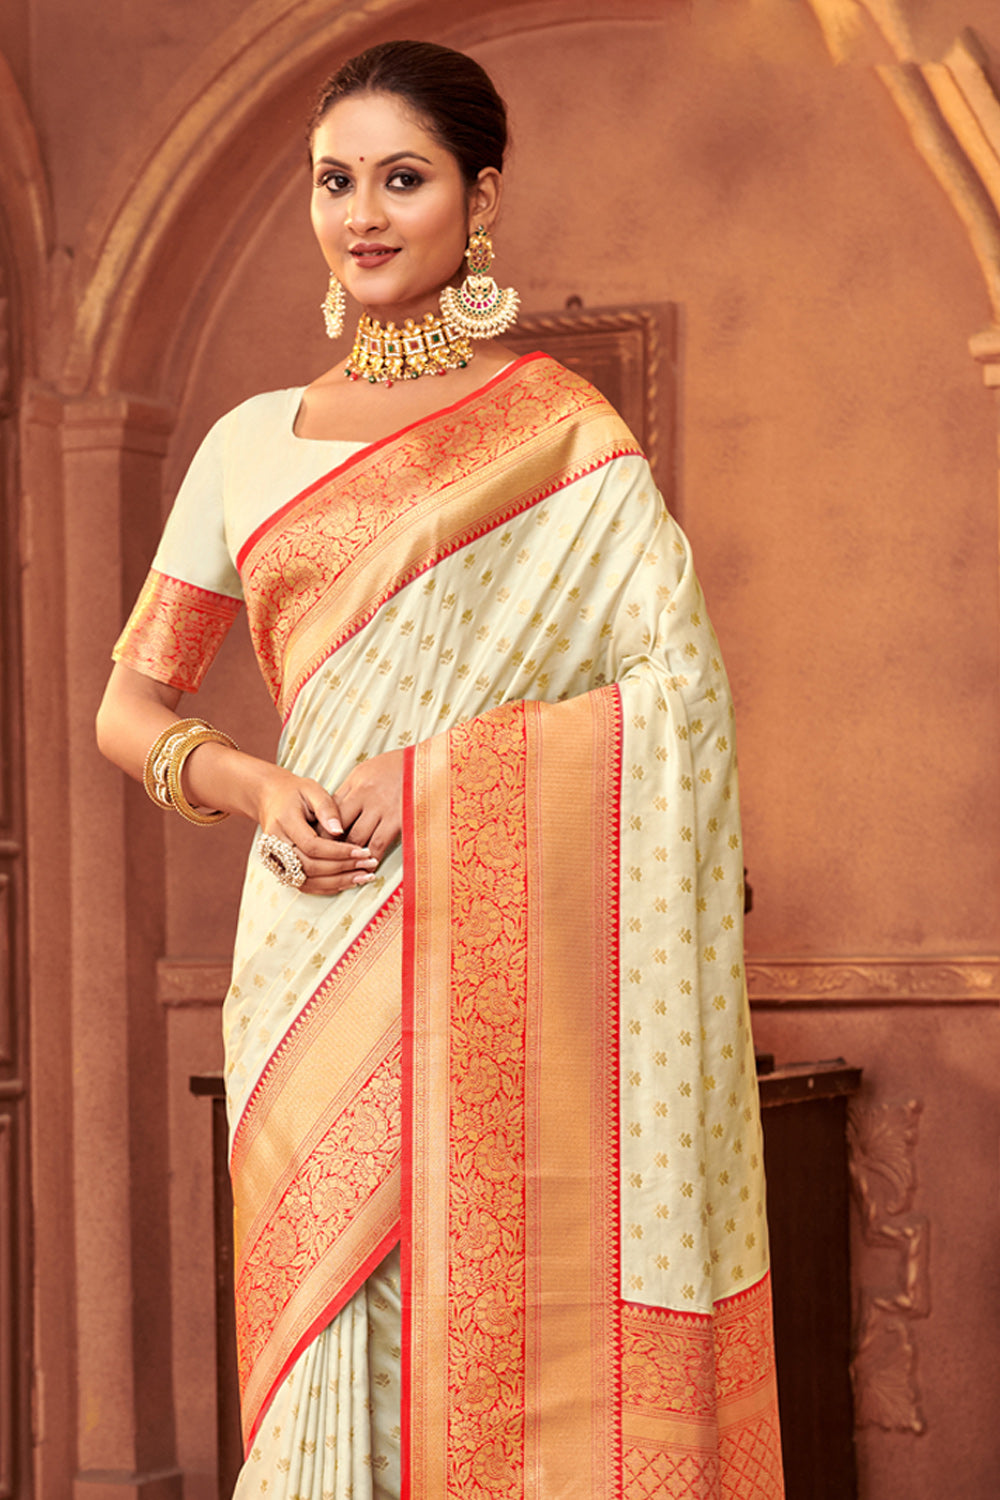 White Bridal Saree - Explore Best Collection of Bridal White Sarees Onlne  at Myntra